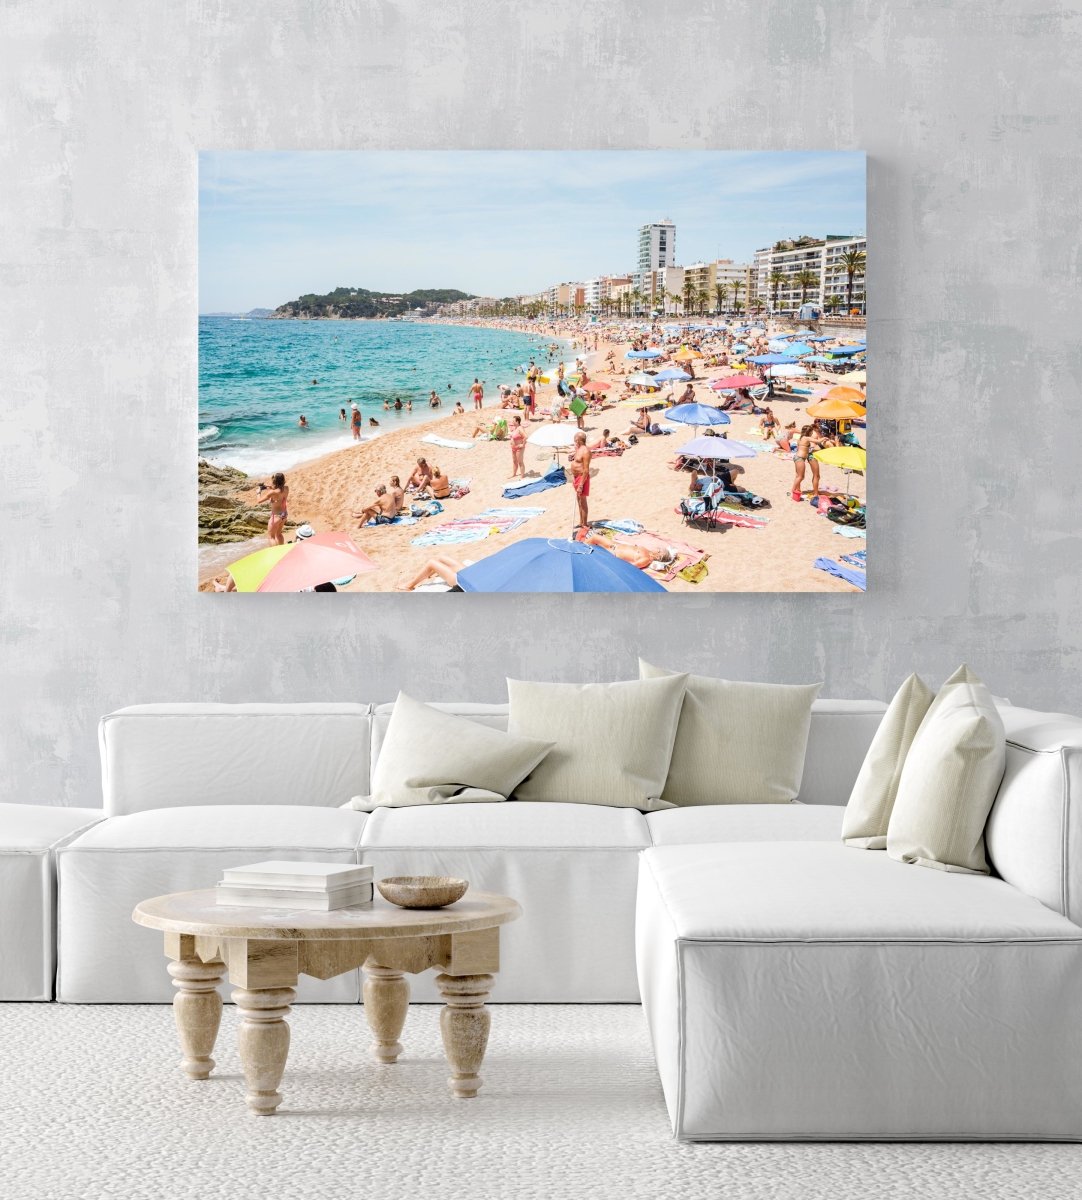 Very busy Lloret de Mar beach on summers day in June in an acrylic/perspex frame